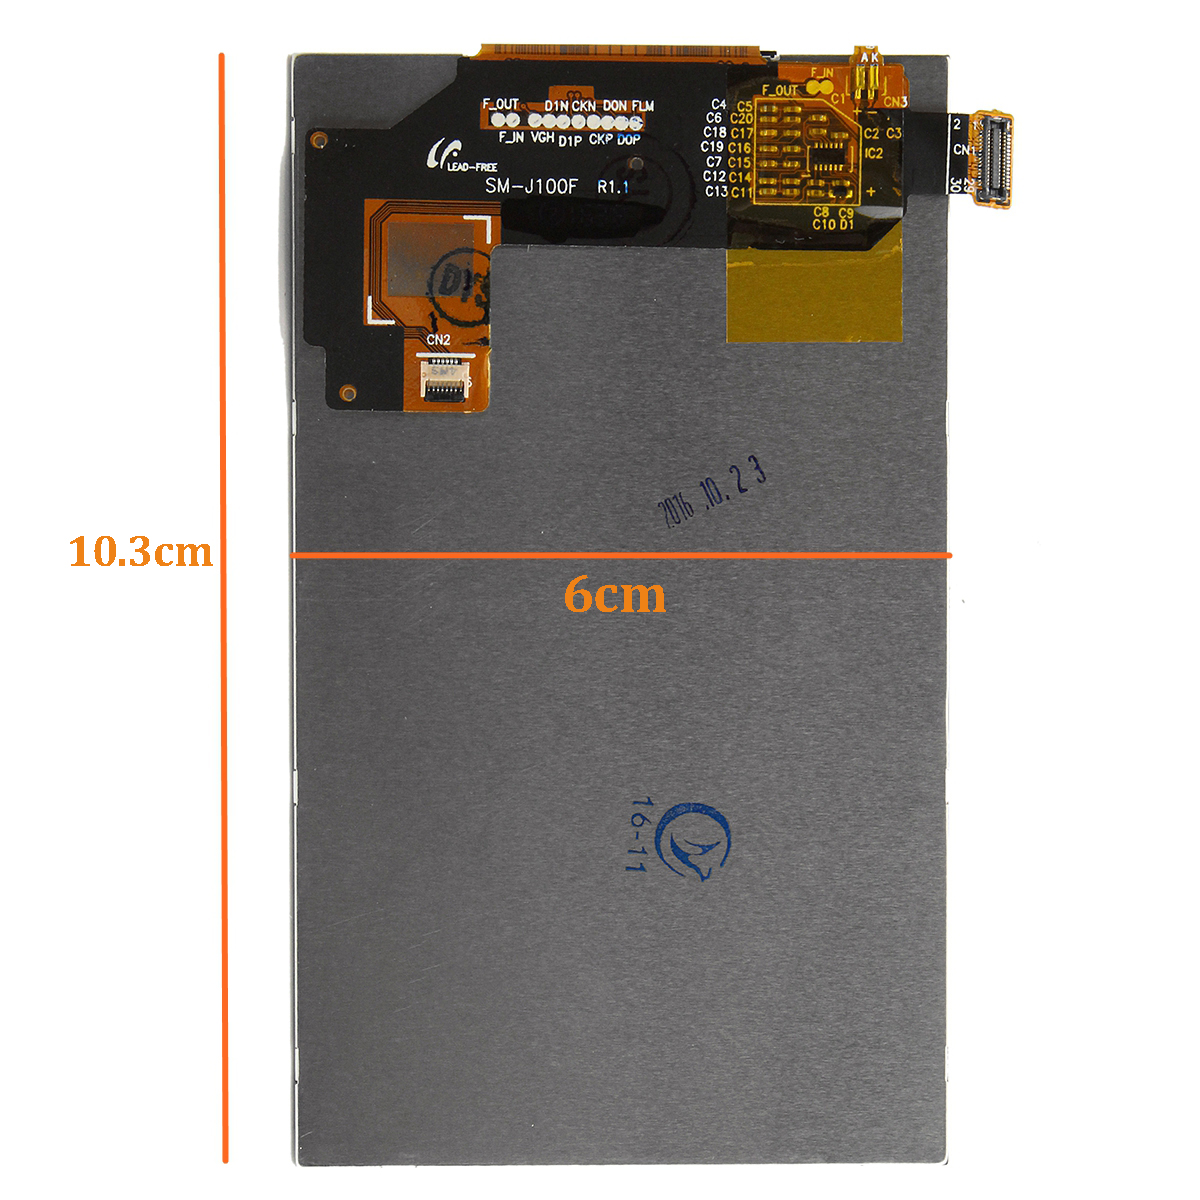 Touch-Screen-Digitizer-LCD-Display-Replacement-Part-amp-Repair-Tools--for-Samsung-Galaxy-J1-SM-J100-1207998